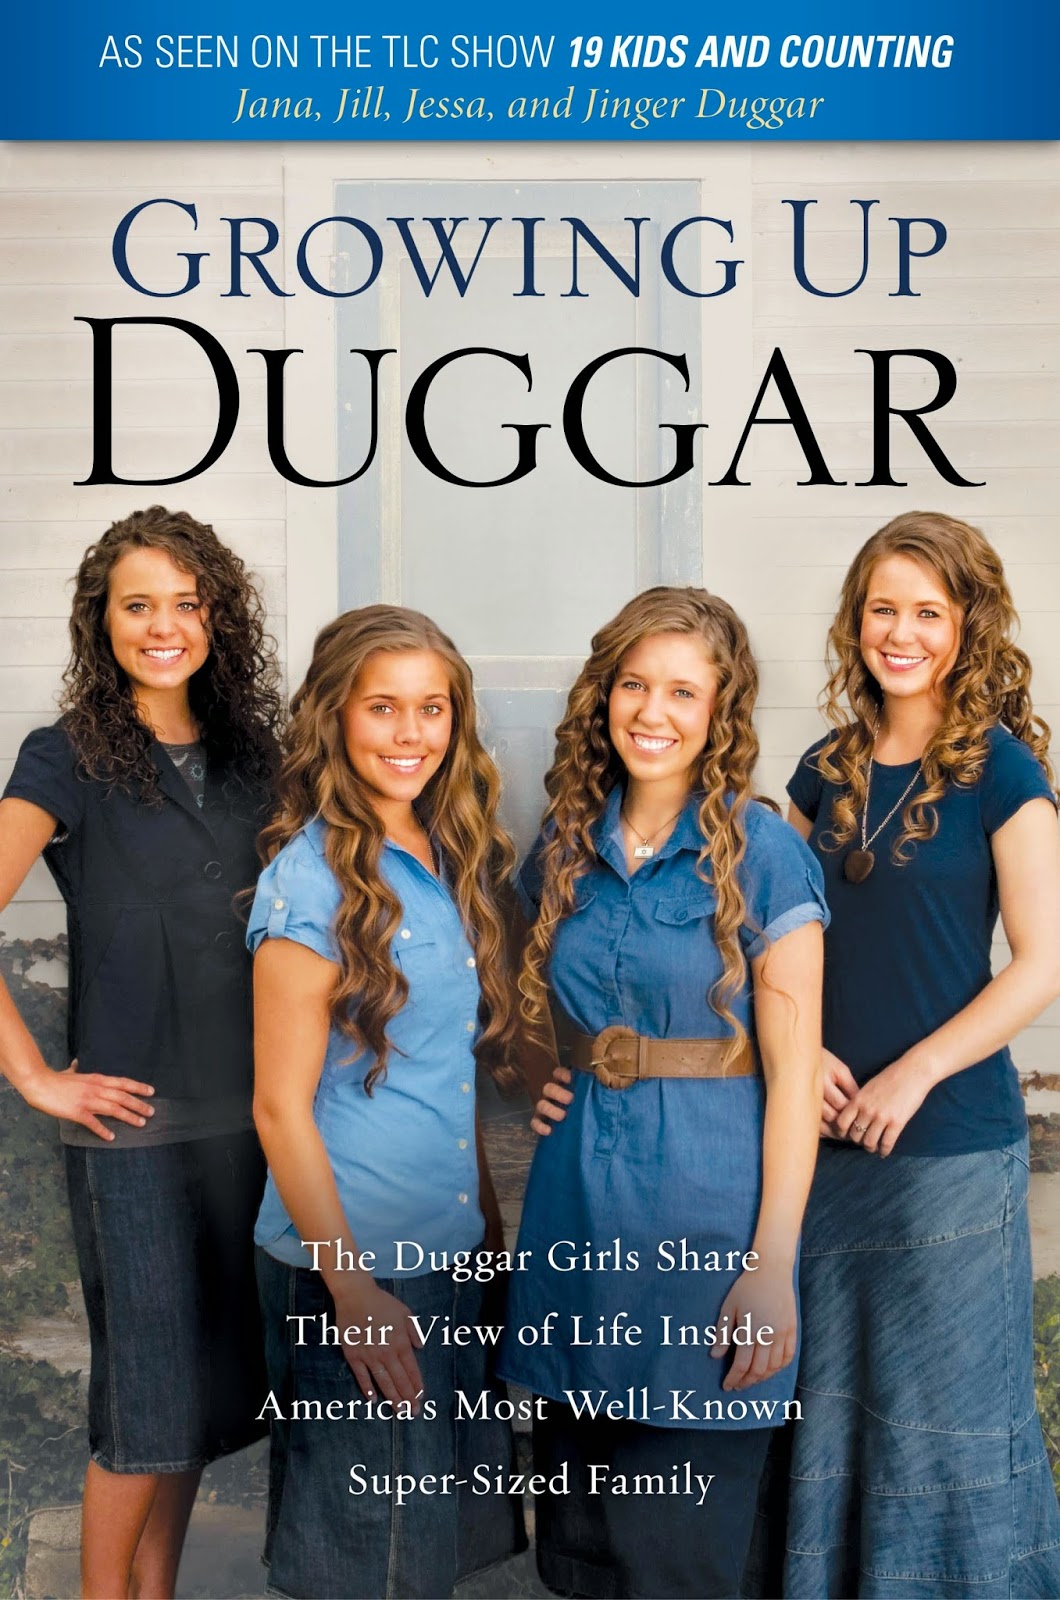 Duggar Family Blog: Updates and Pictures Jim Bob and Michelle Duggar  title=